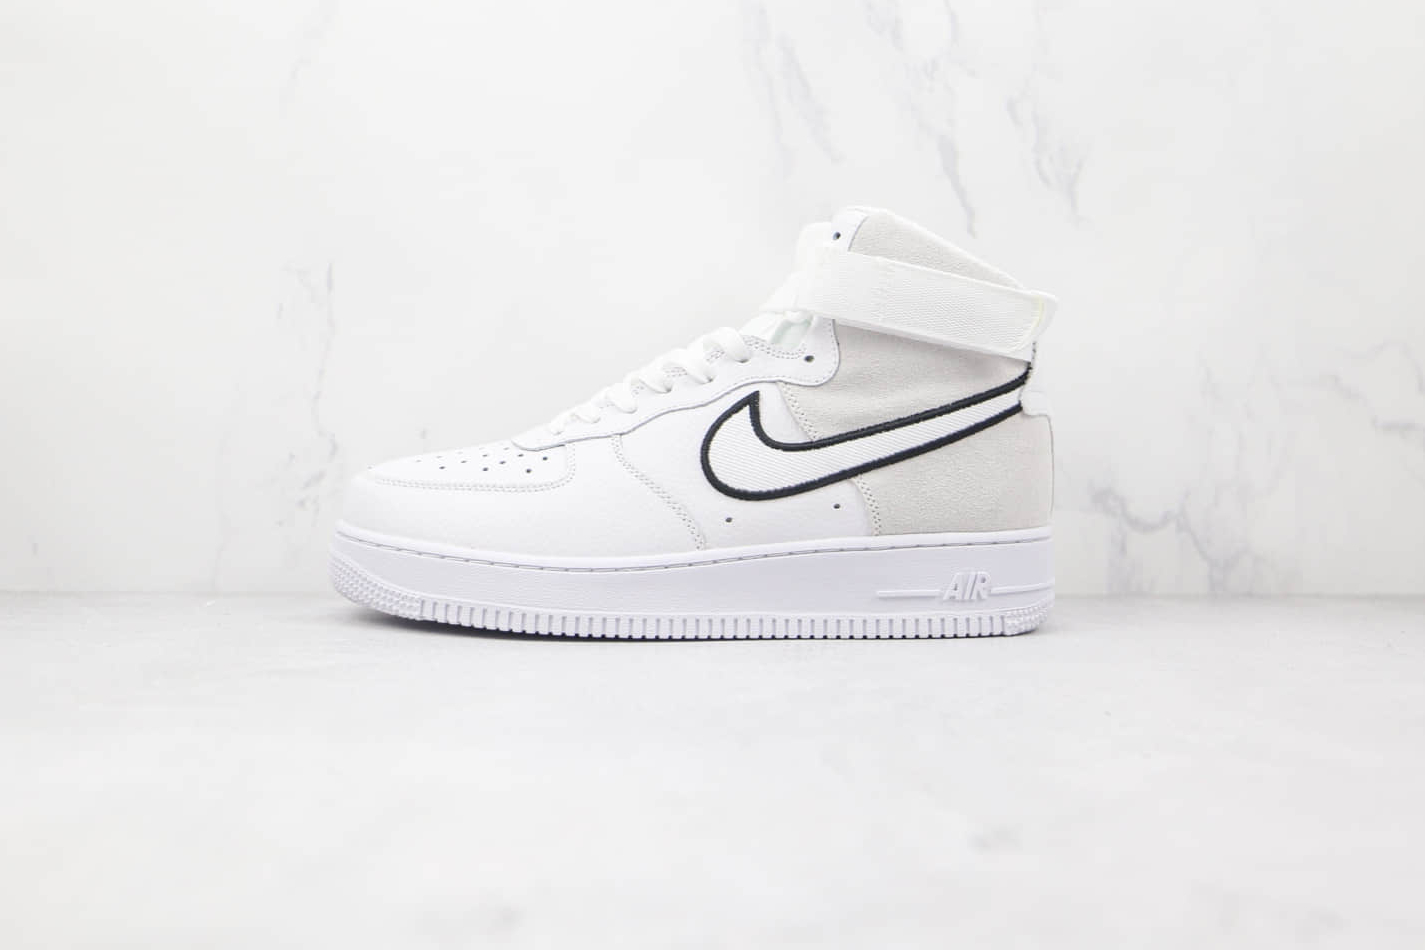 Nike Air Force 1 High 'White Vast Grey' AO2442-100 - Shop the Iconic Sneaker